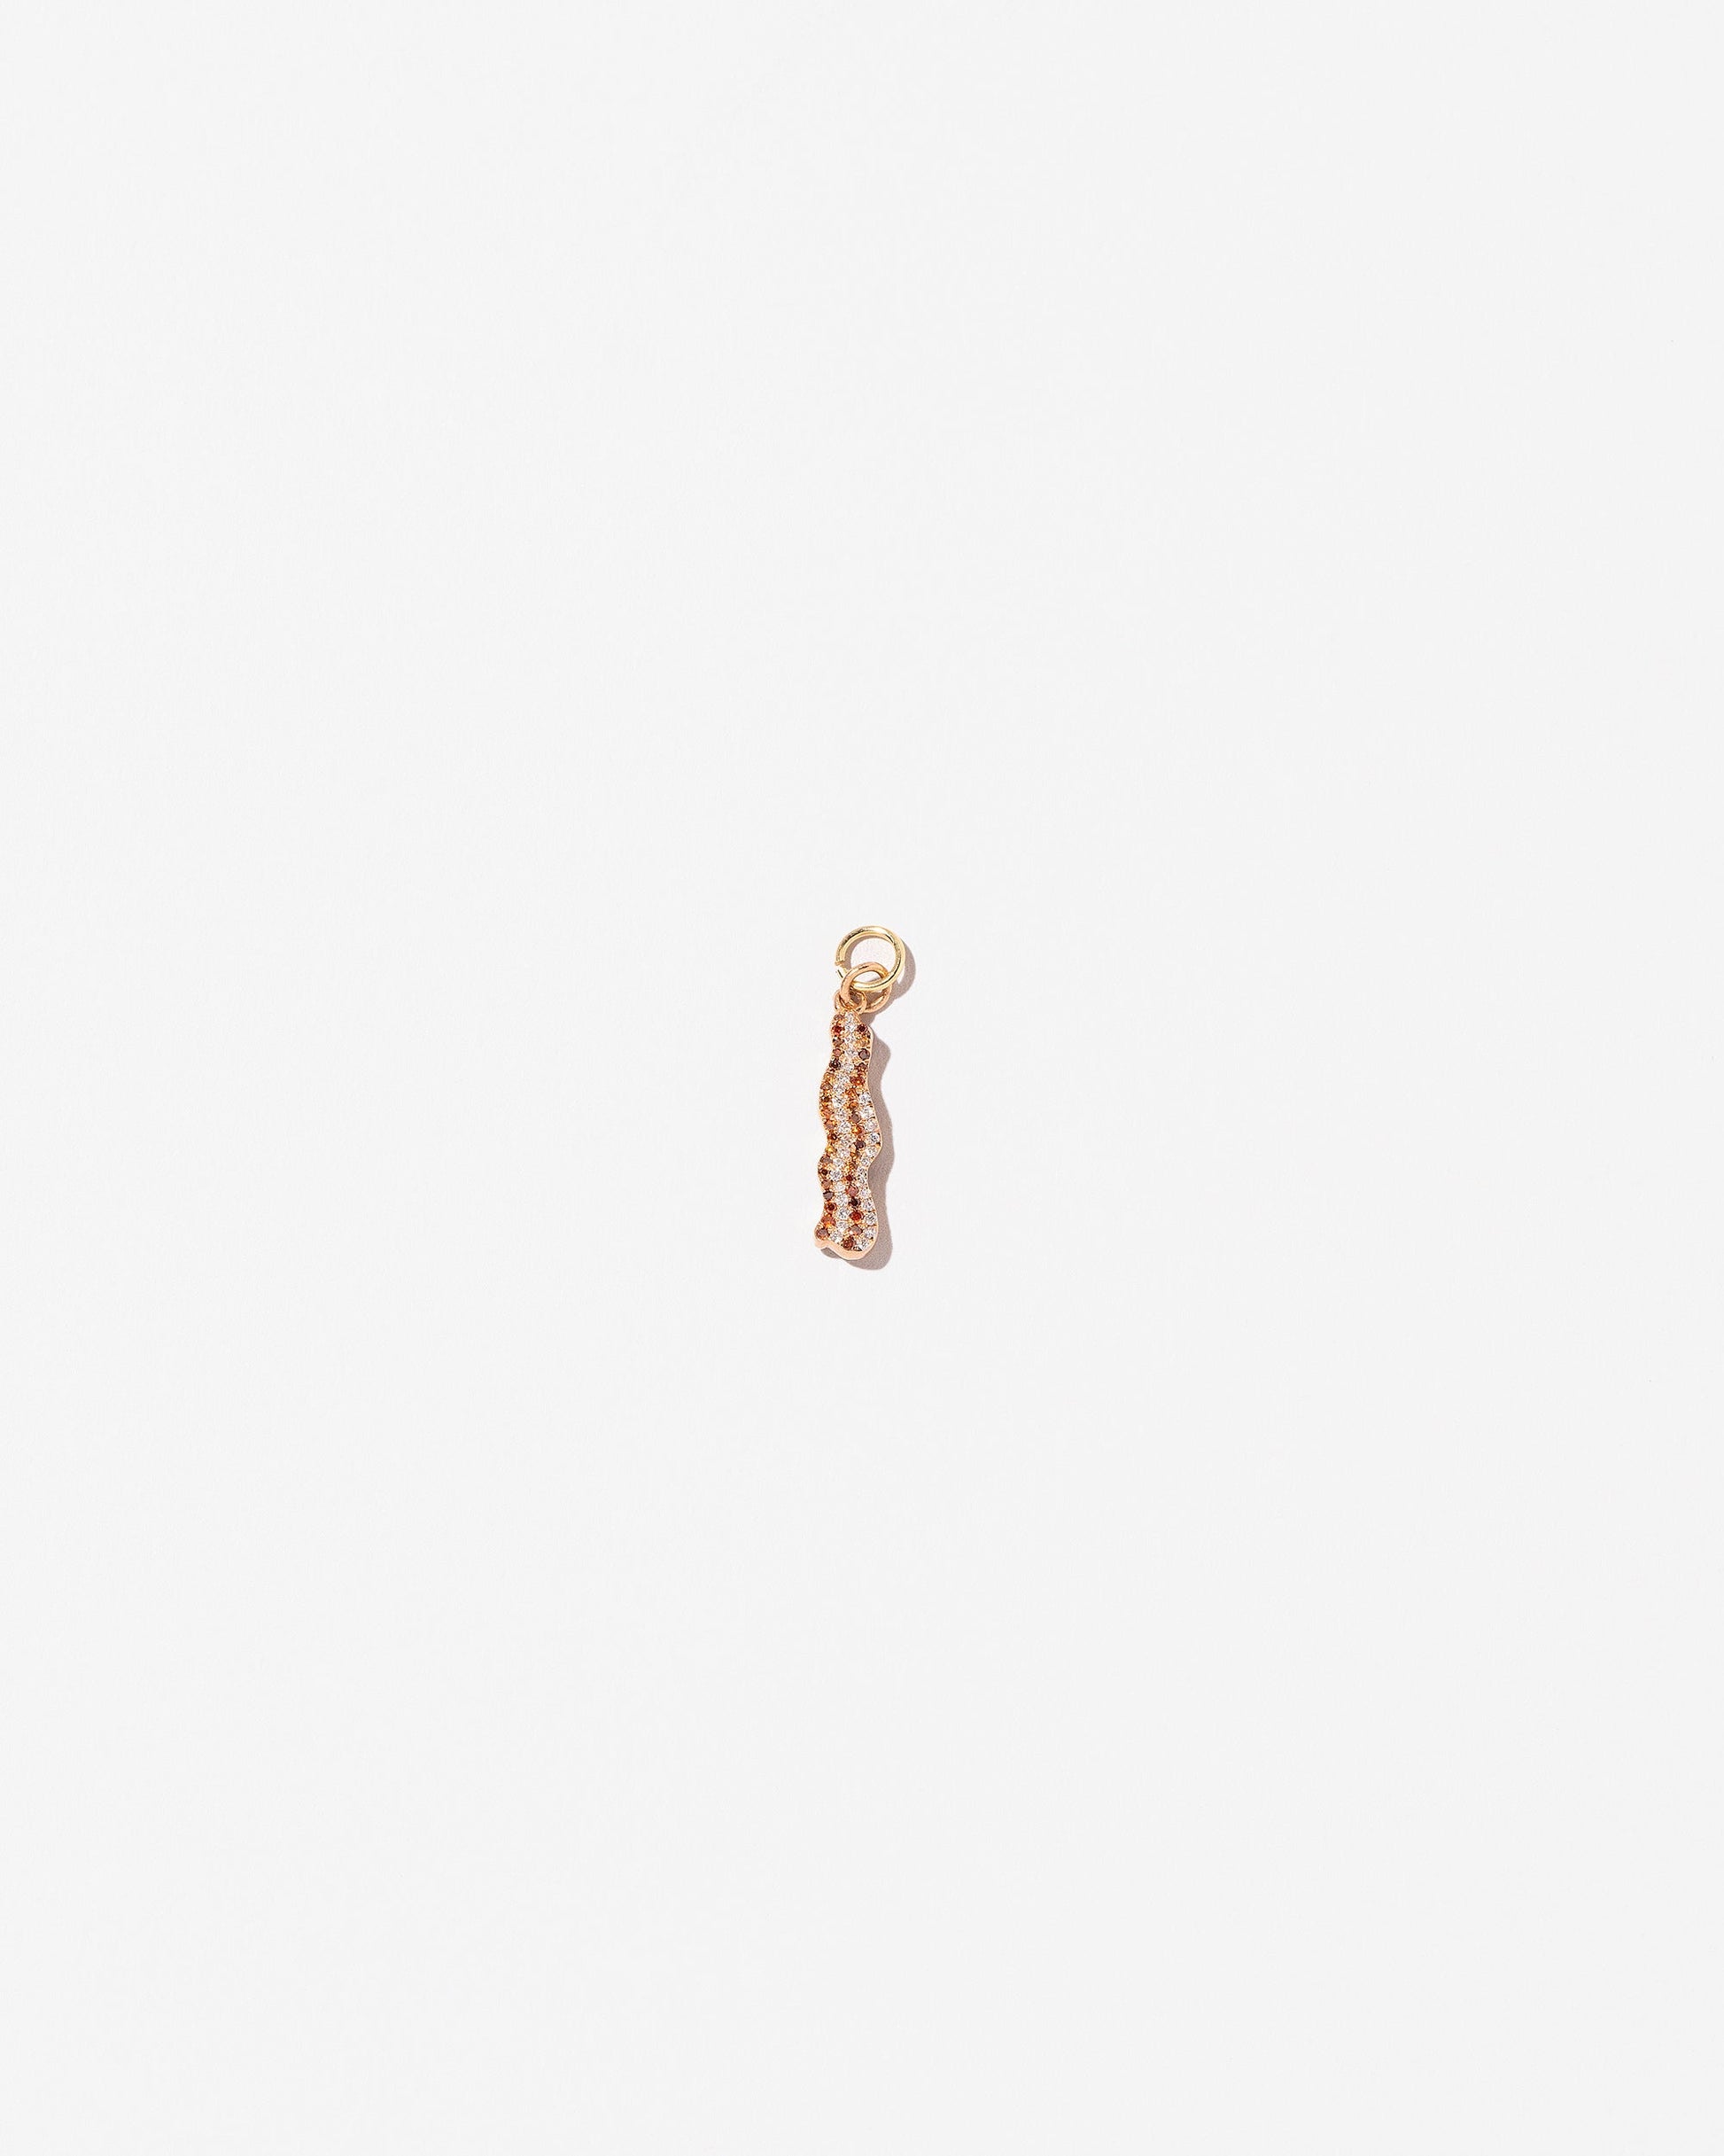  Bacon Charm on light color background.